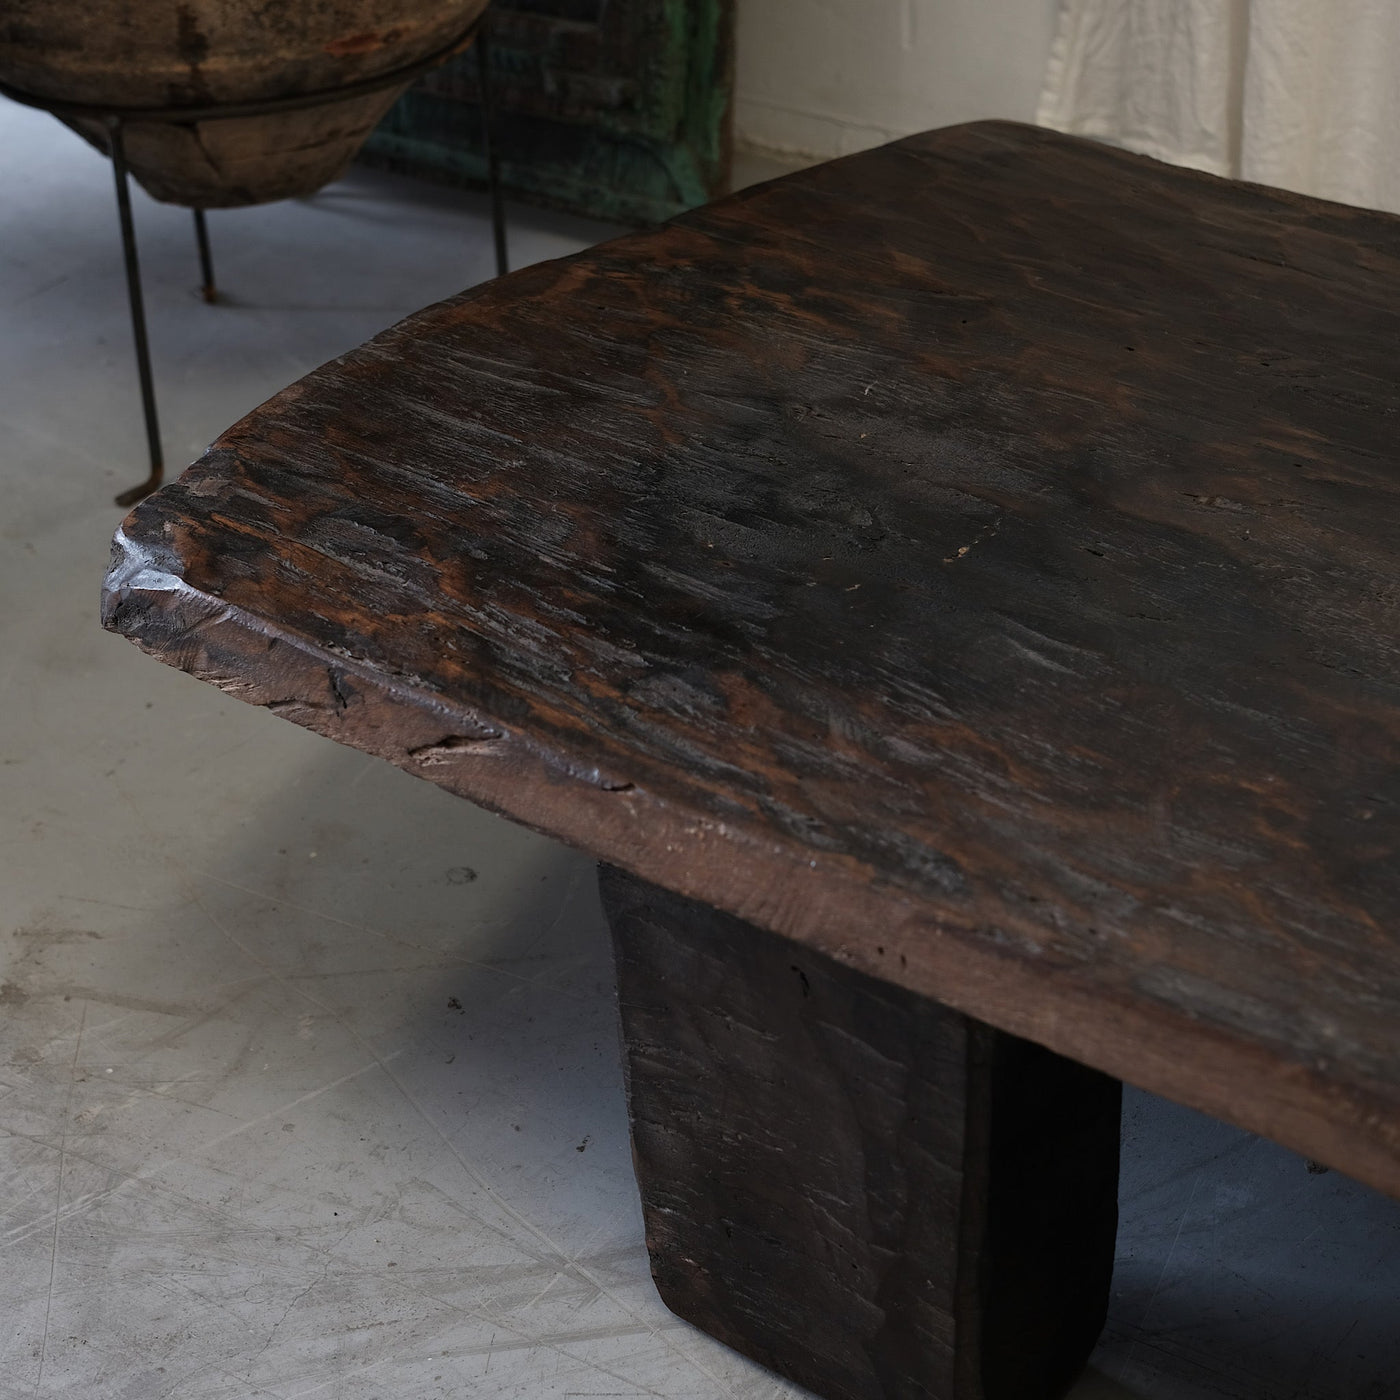 Authentic old naga table n ° 43